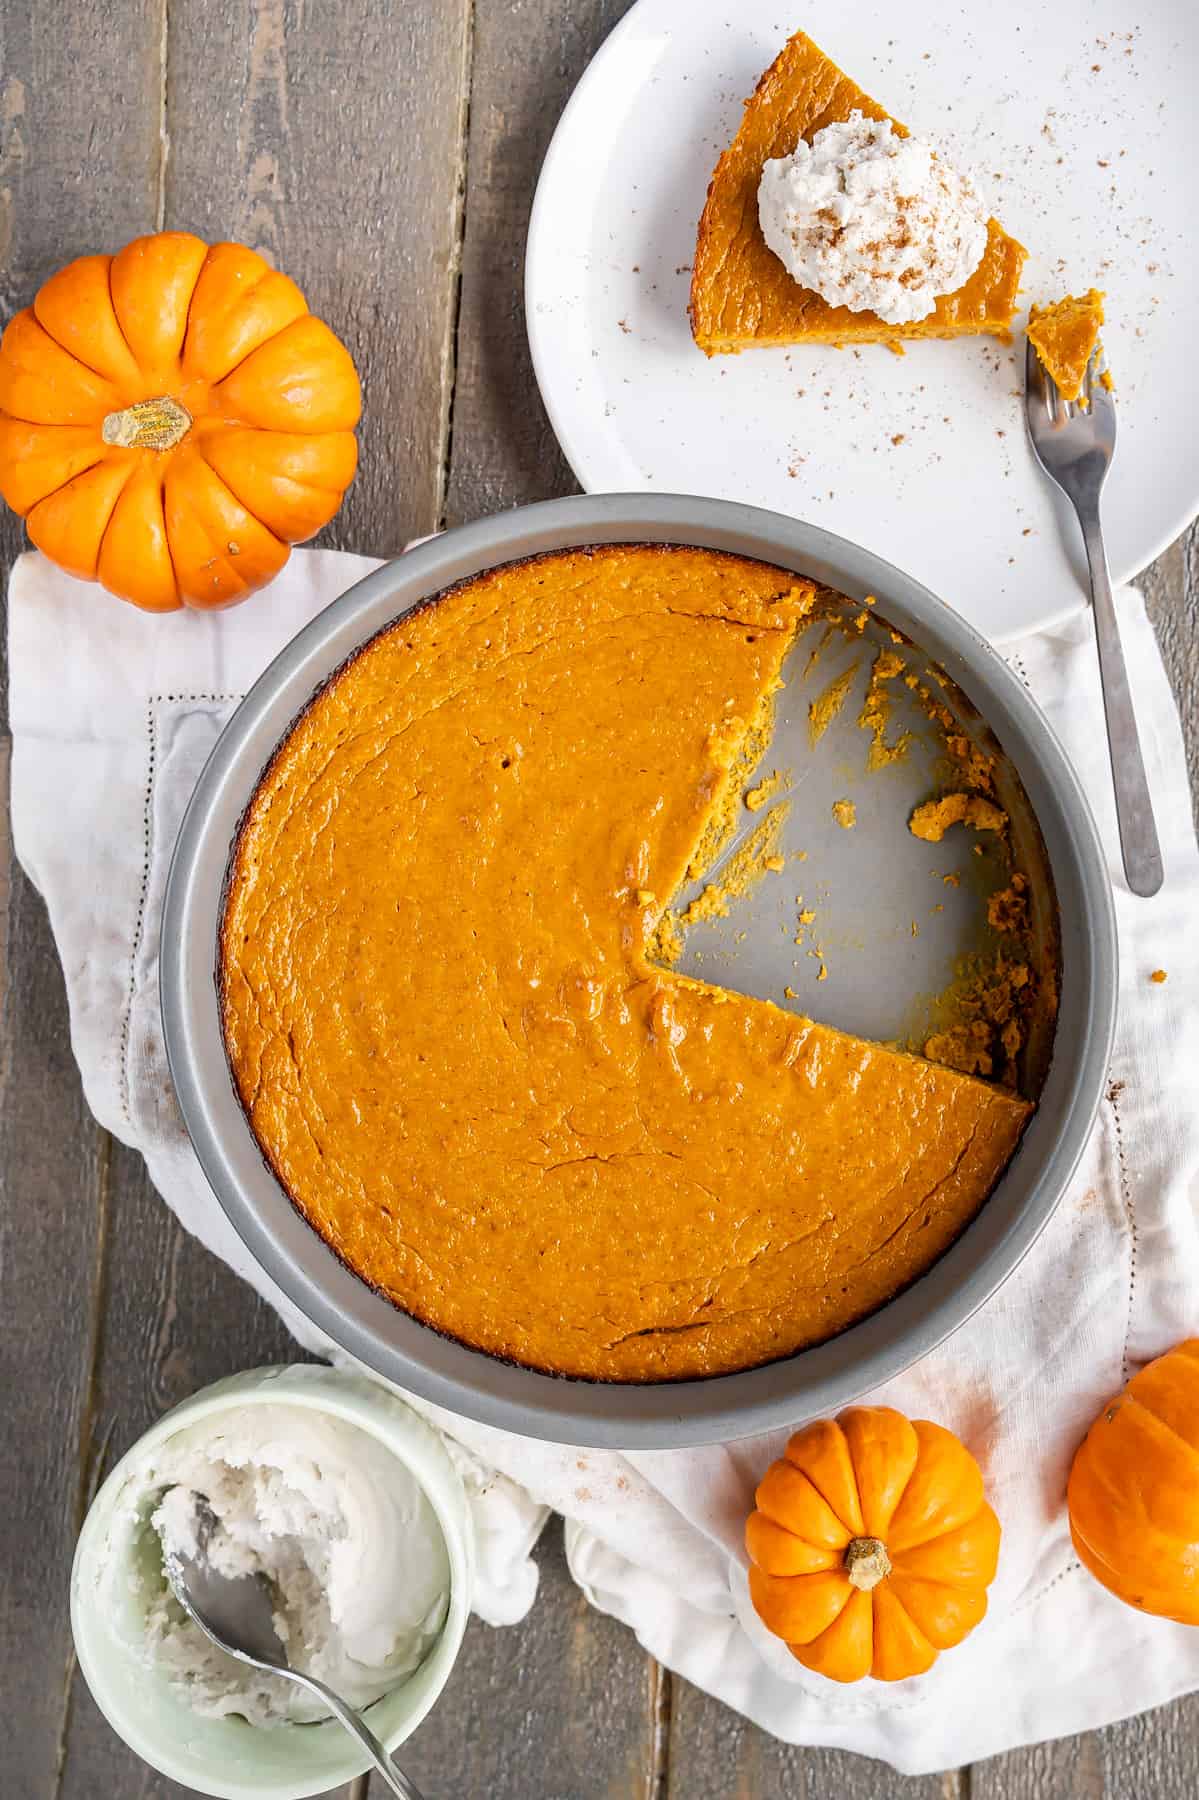 A crustless pumpkin pie surrounded by a slice with whipped cream and mini pumpkins.